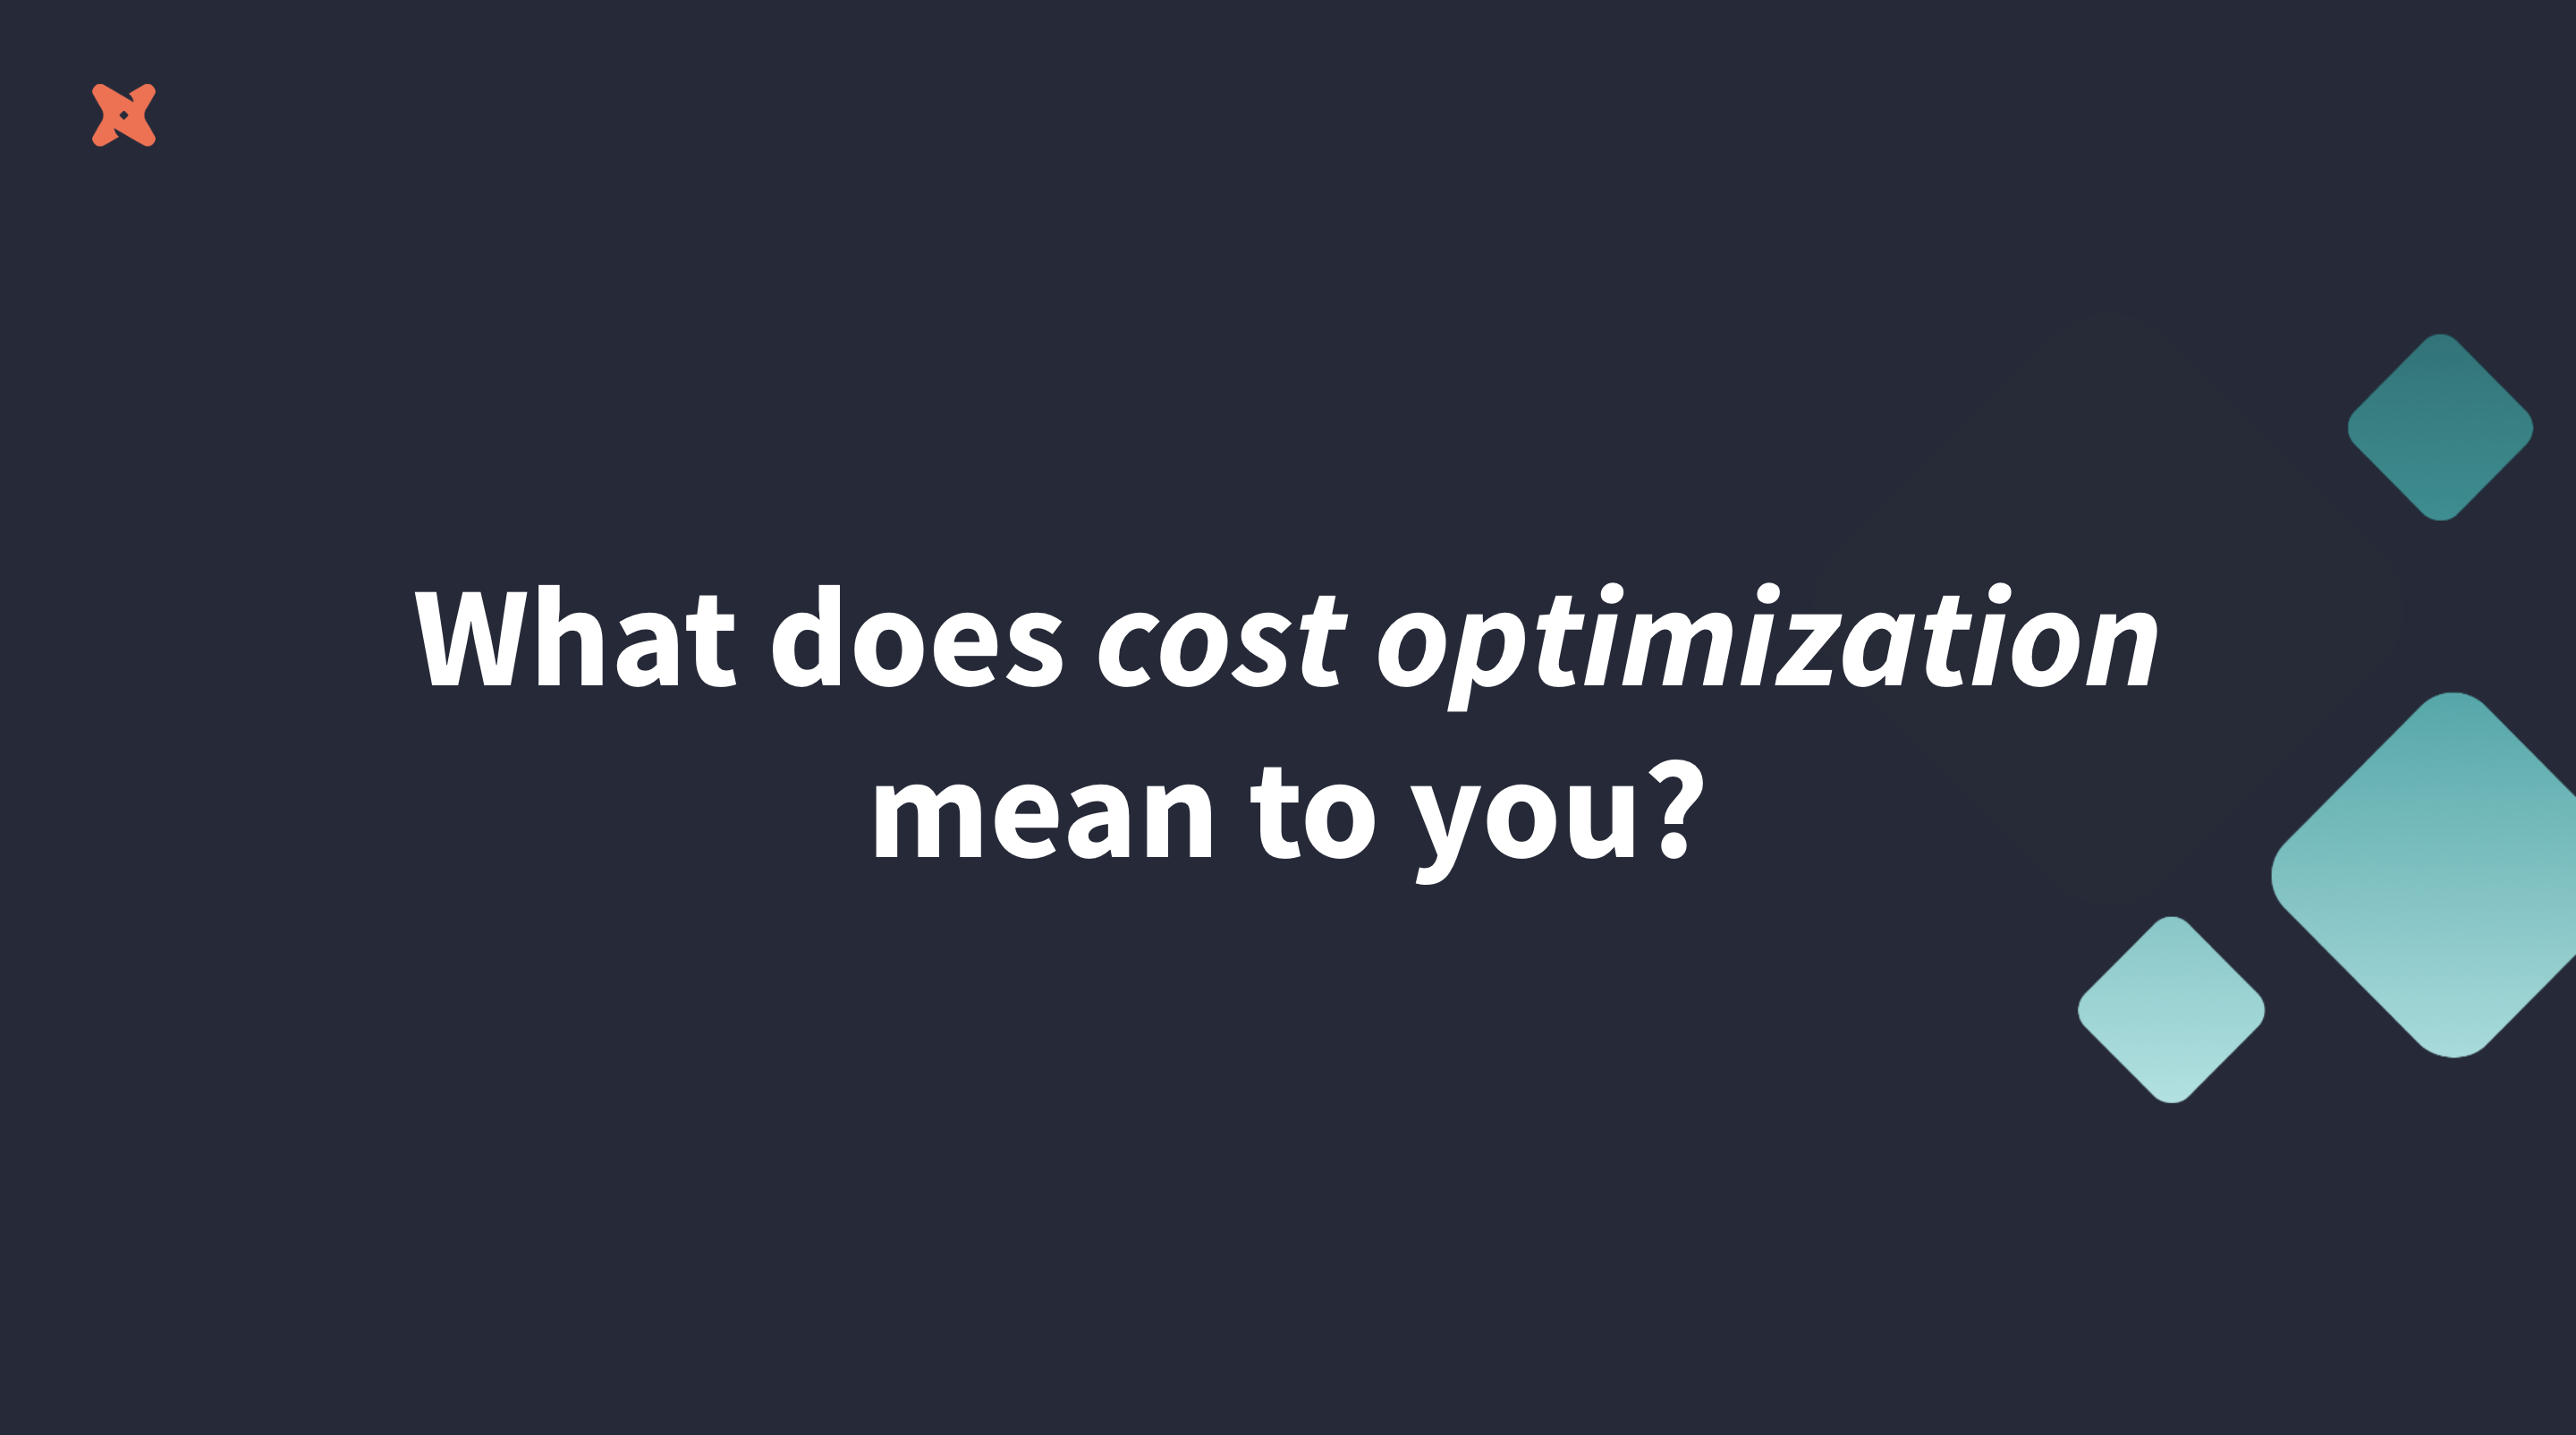 4 Experts on How to Optimize Costs in Your Data Work & Pipelines